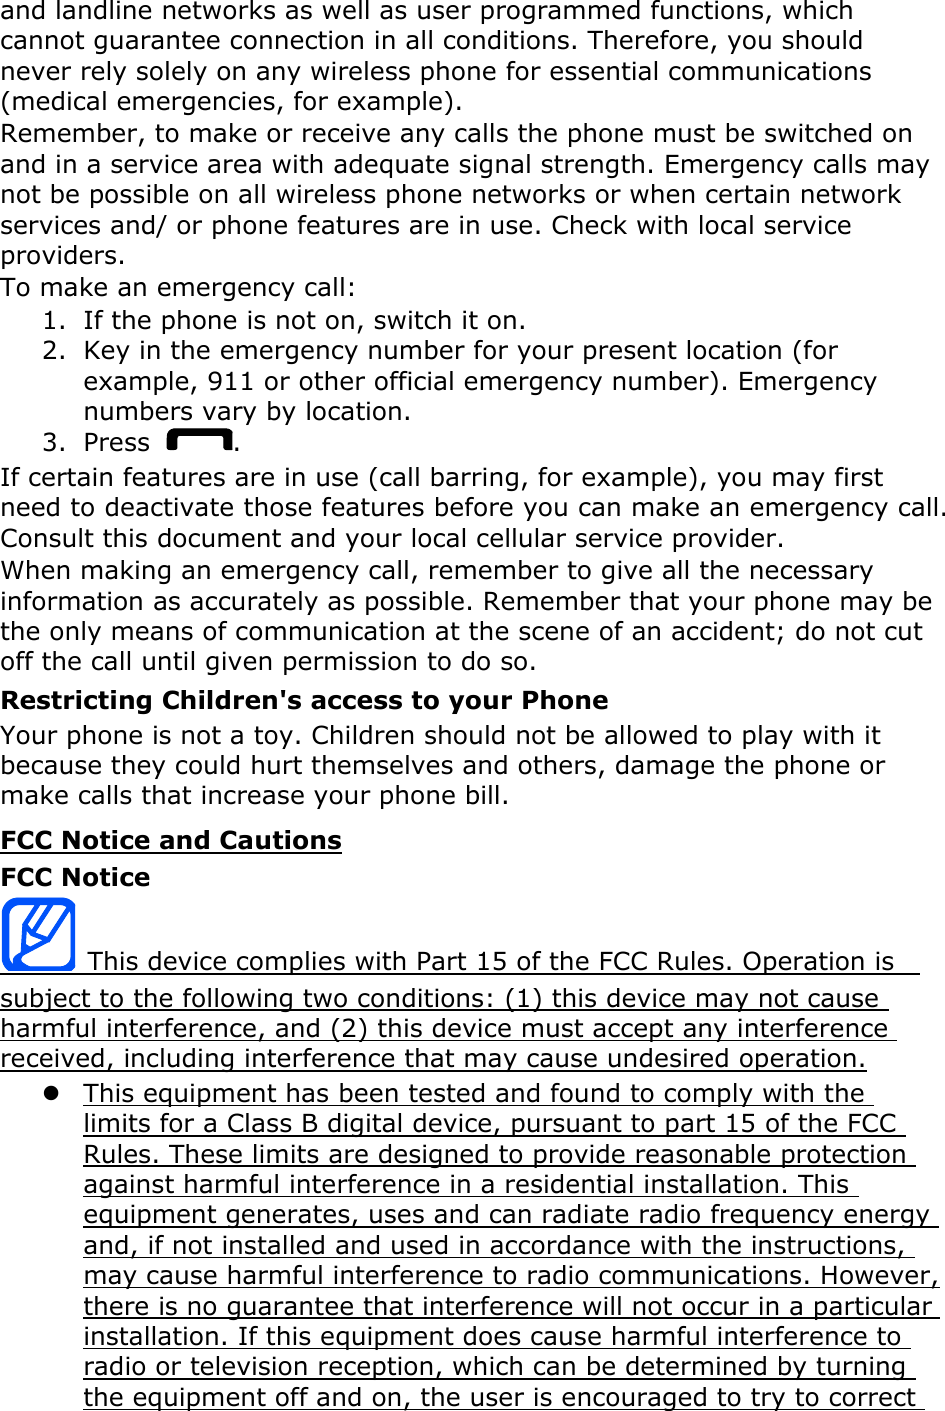 Page 16 of Samsung Electronics Co GTI8350 Cellular/ PCS GSM/ EDGE Phone with WLAN and Bluetooth User Manual